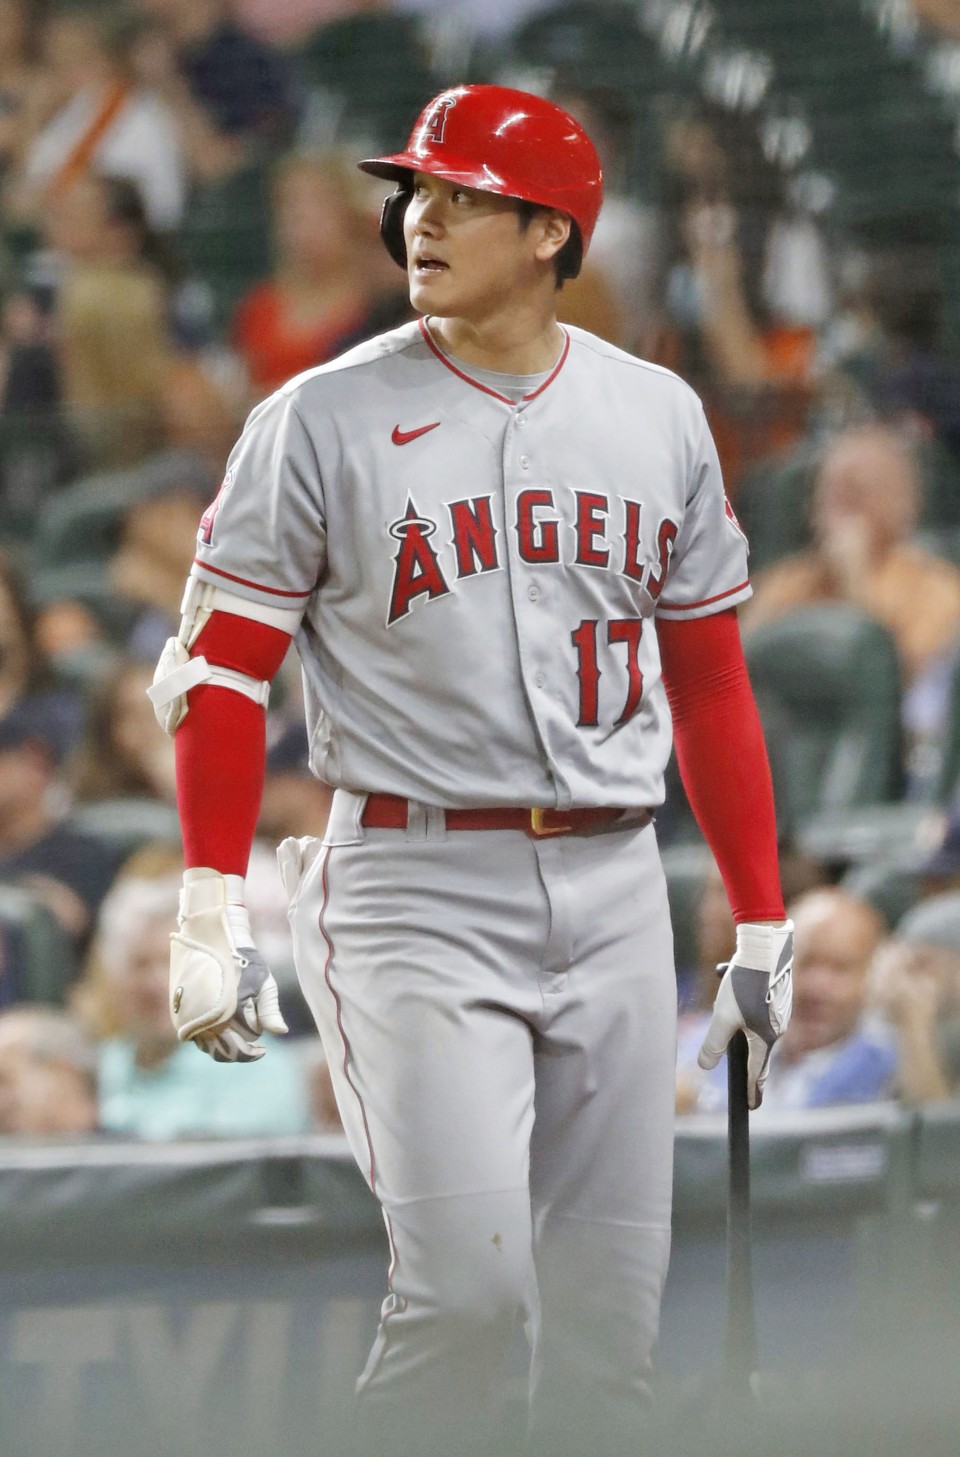 Baseball: Shohei Ohtani pitches, hits, plays outfield in Angels' loss